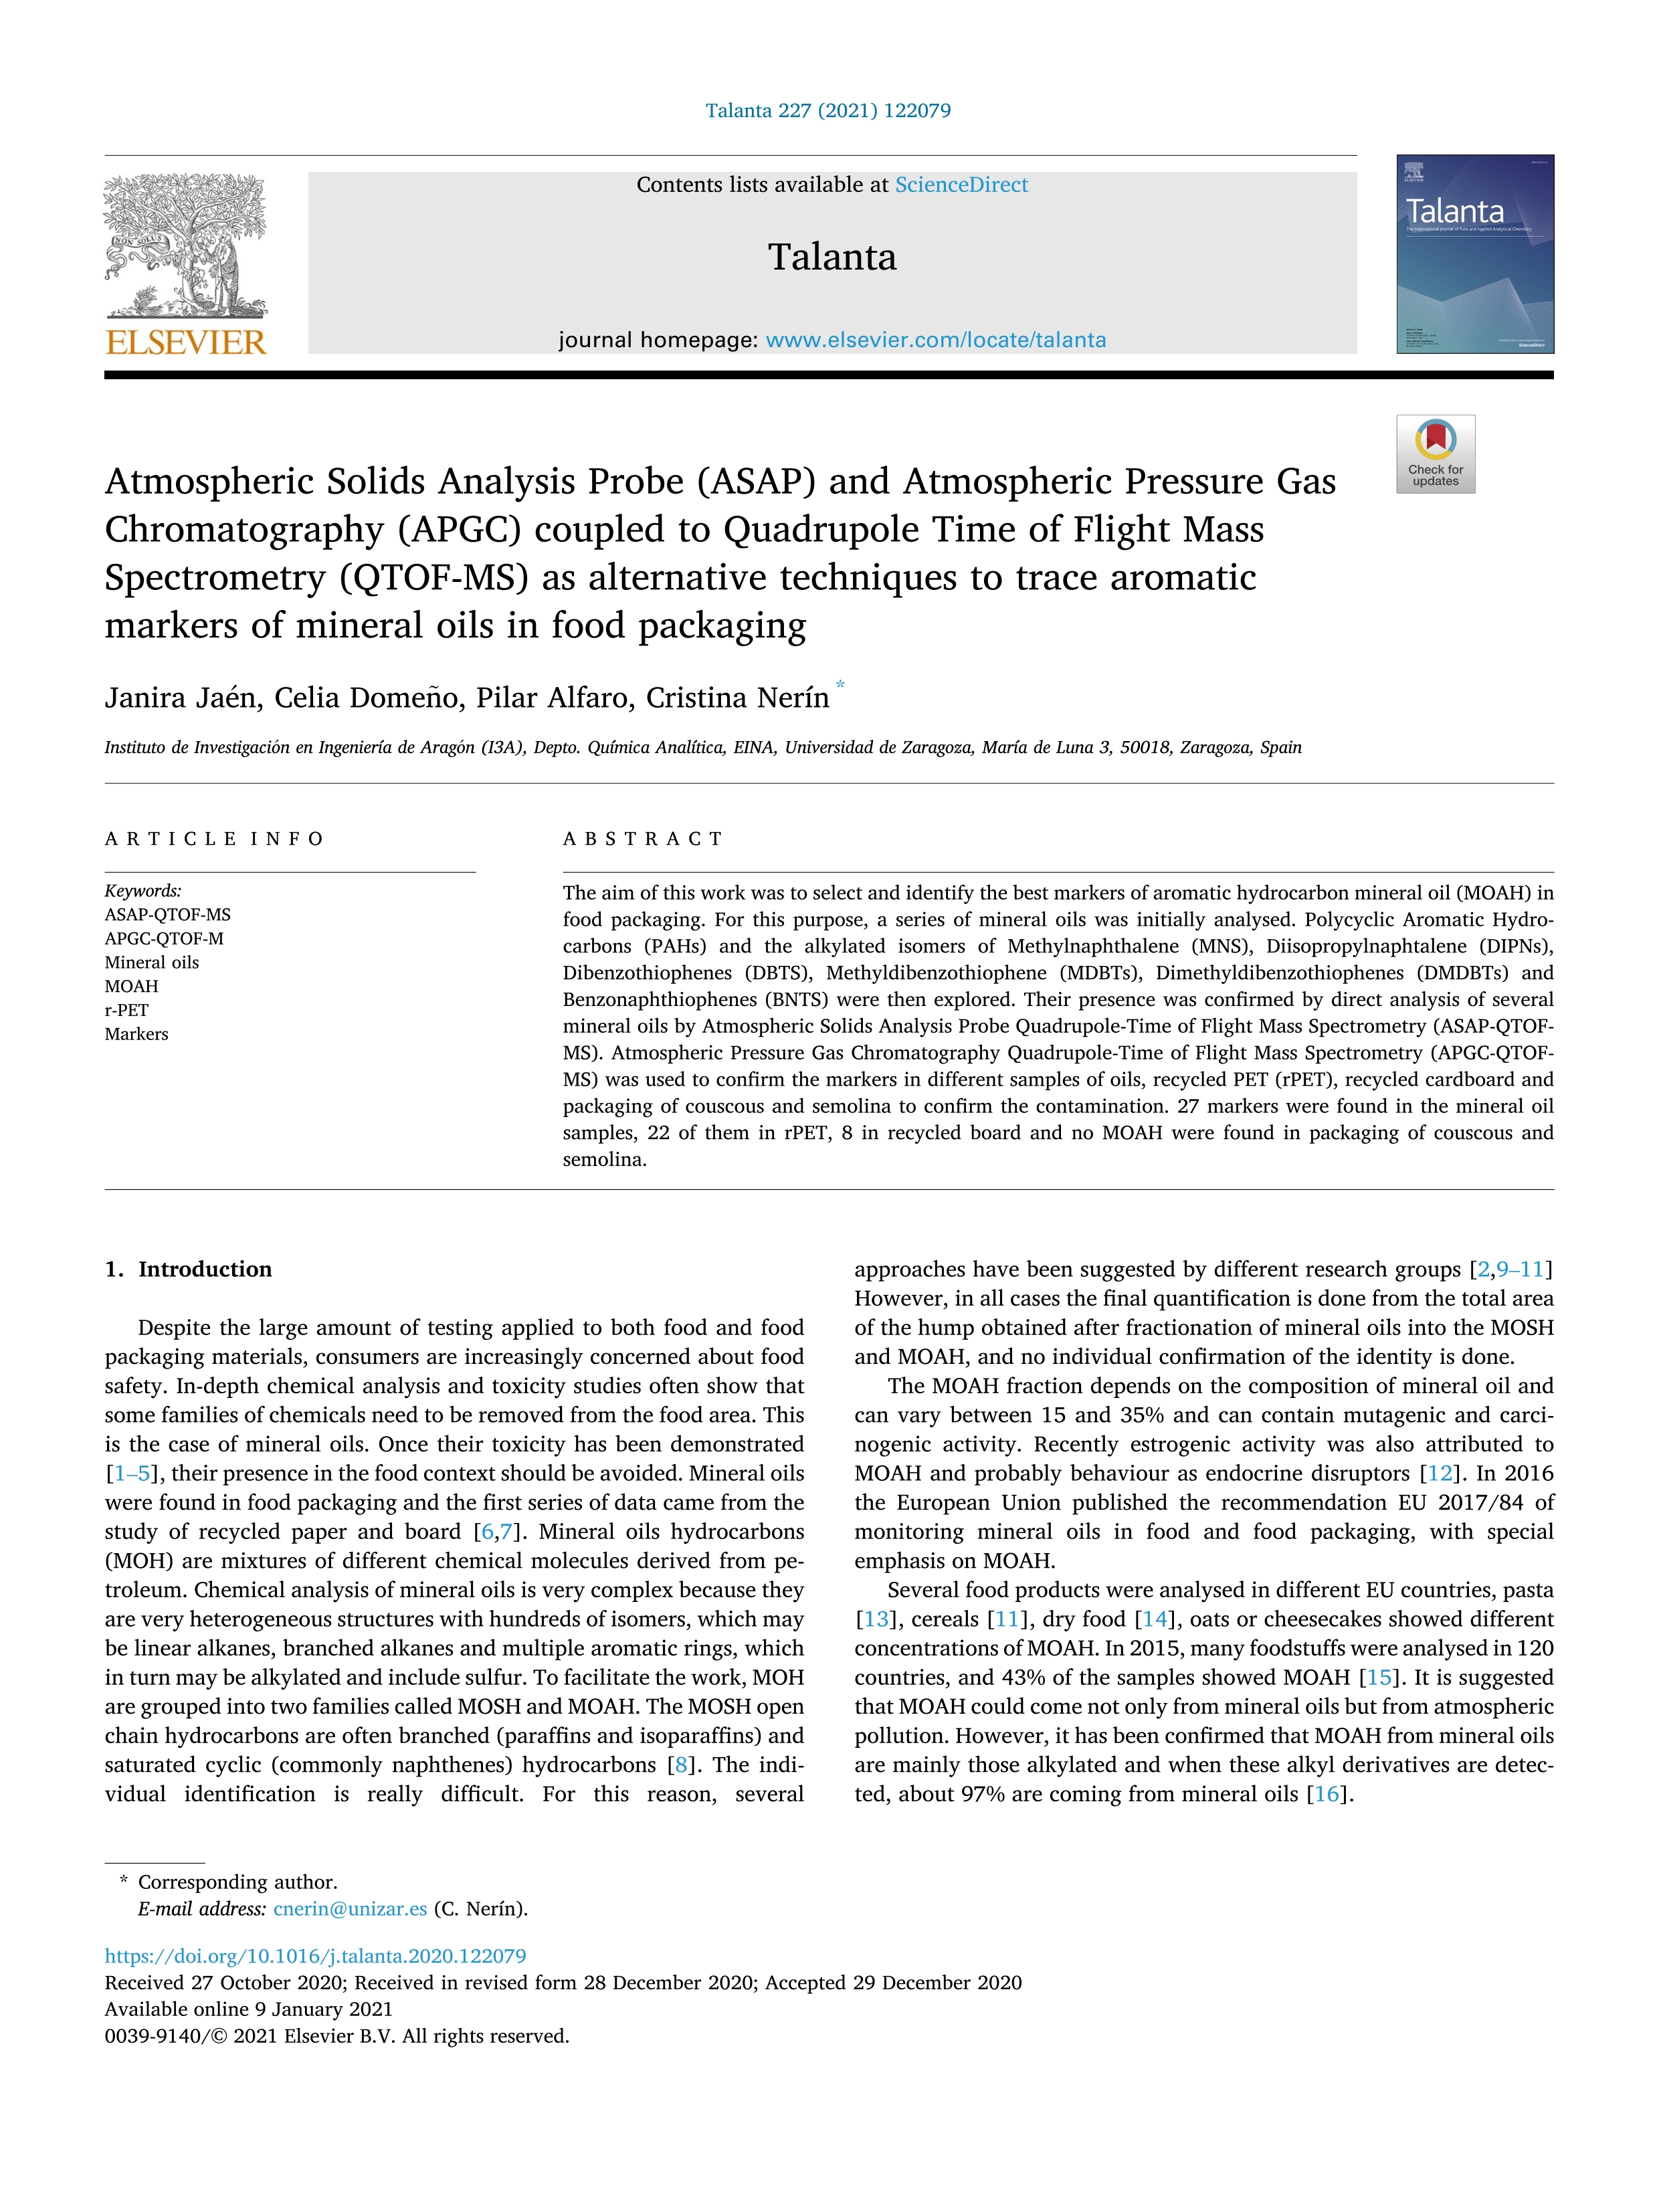 Atmospheric Solids Analysis Probe (ASAP) and Atmospheric Pressure Gas Chromatography (APGC) coupled to Quadrupole Time of Flight Mass Spectrometry (QTOF-MS) as alternative techniques to trace aromatic markers of mineral oils in food packaging